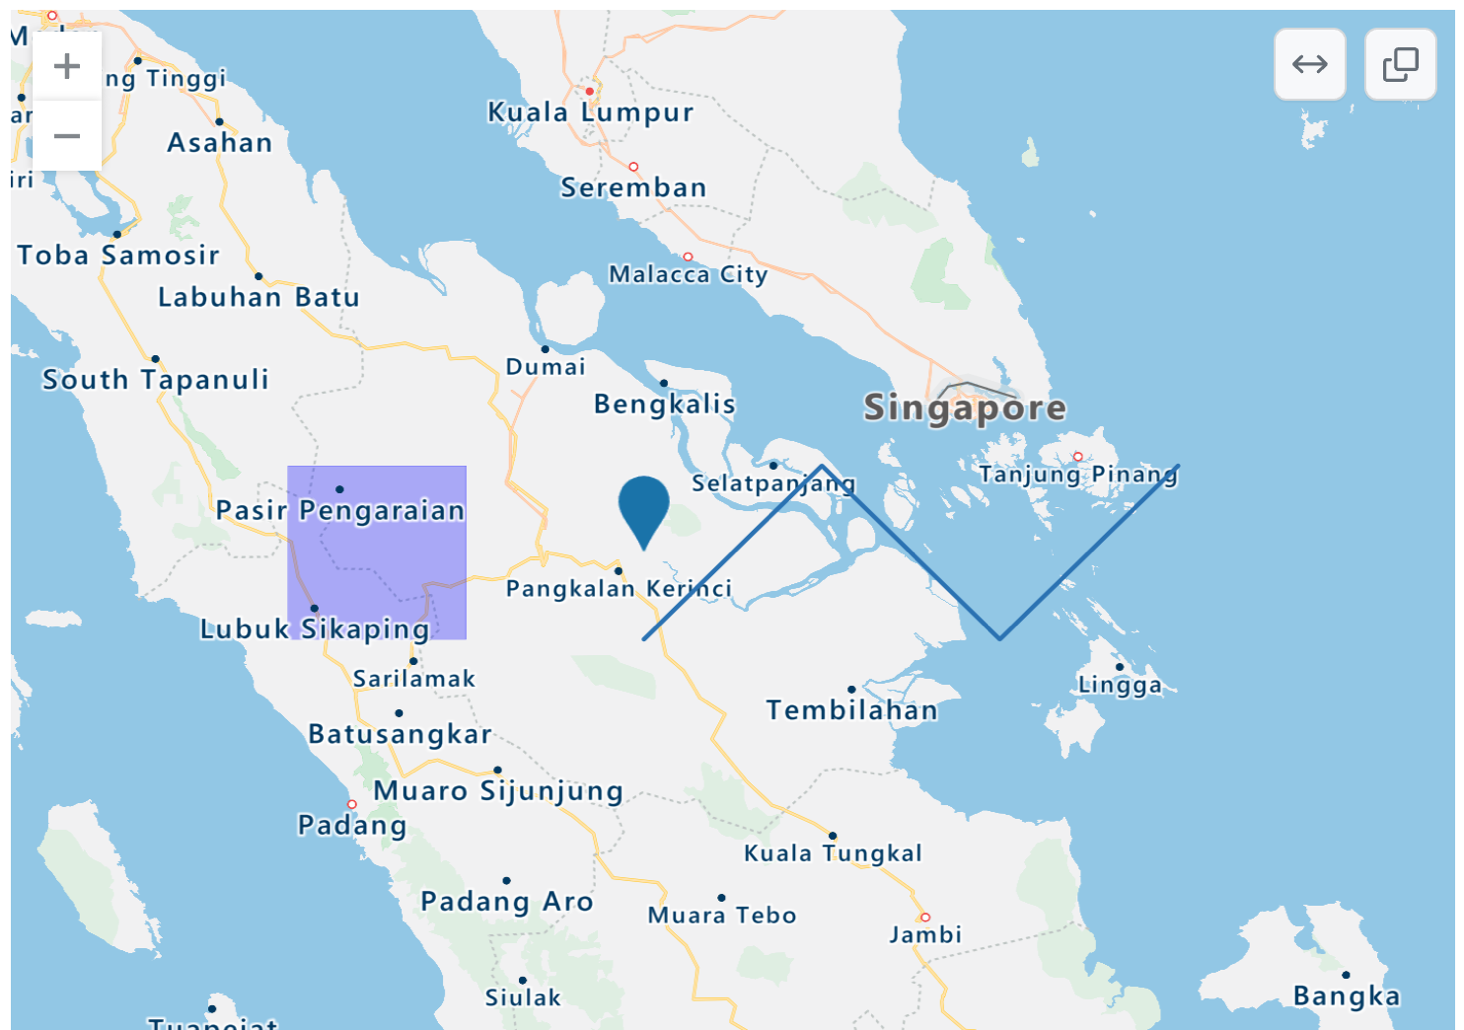 Screenshot of a rendered TopoJSON map of parts of Indonesia, Singapore, and Malaysia with a blue point, a purple rectangular overlay, and blue zigzag lines.